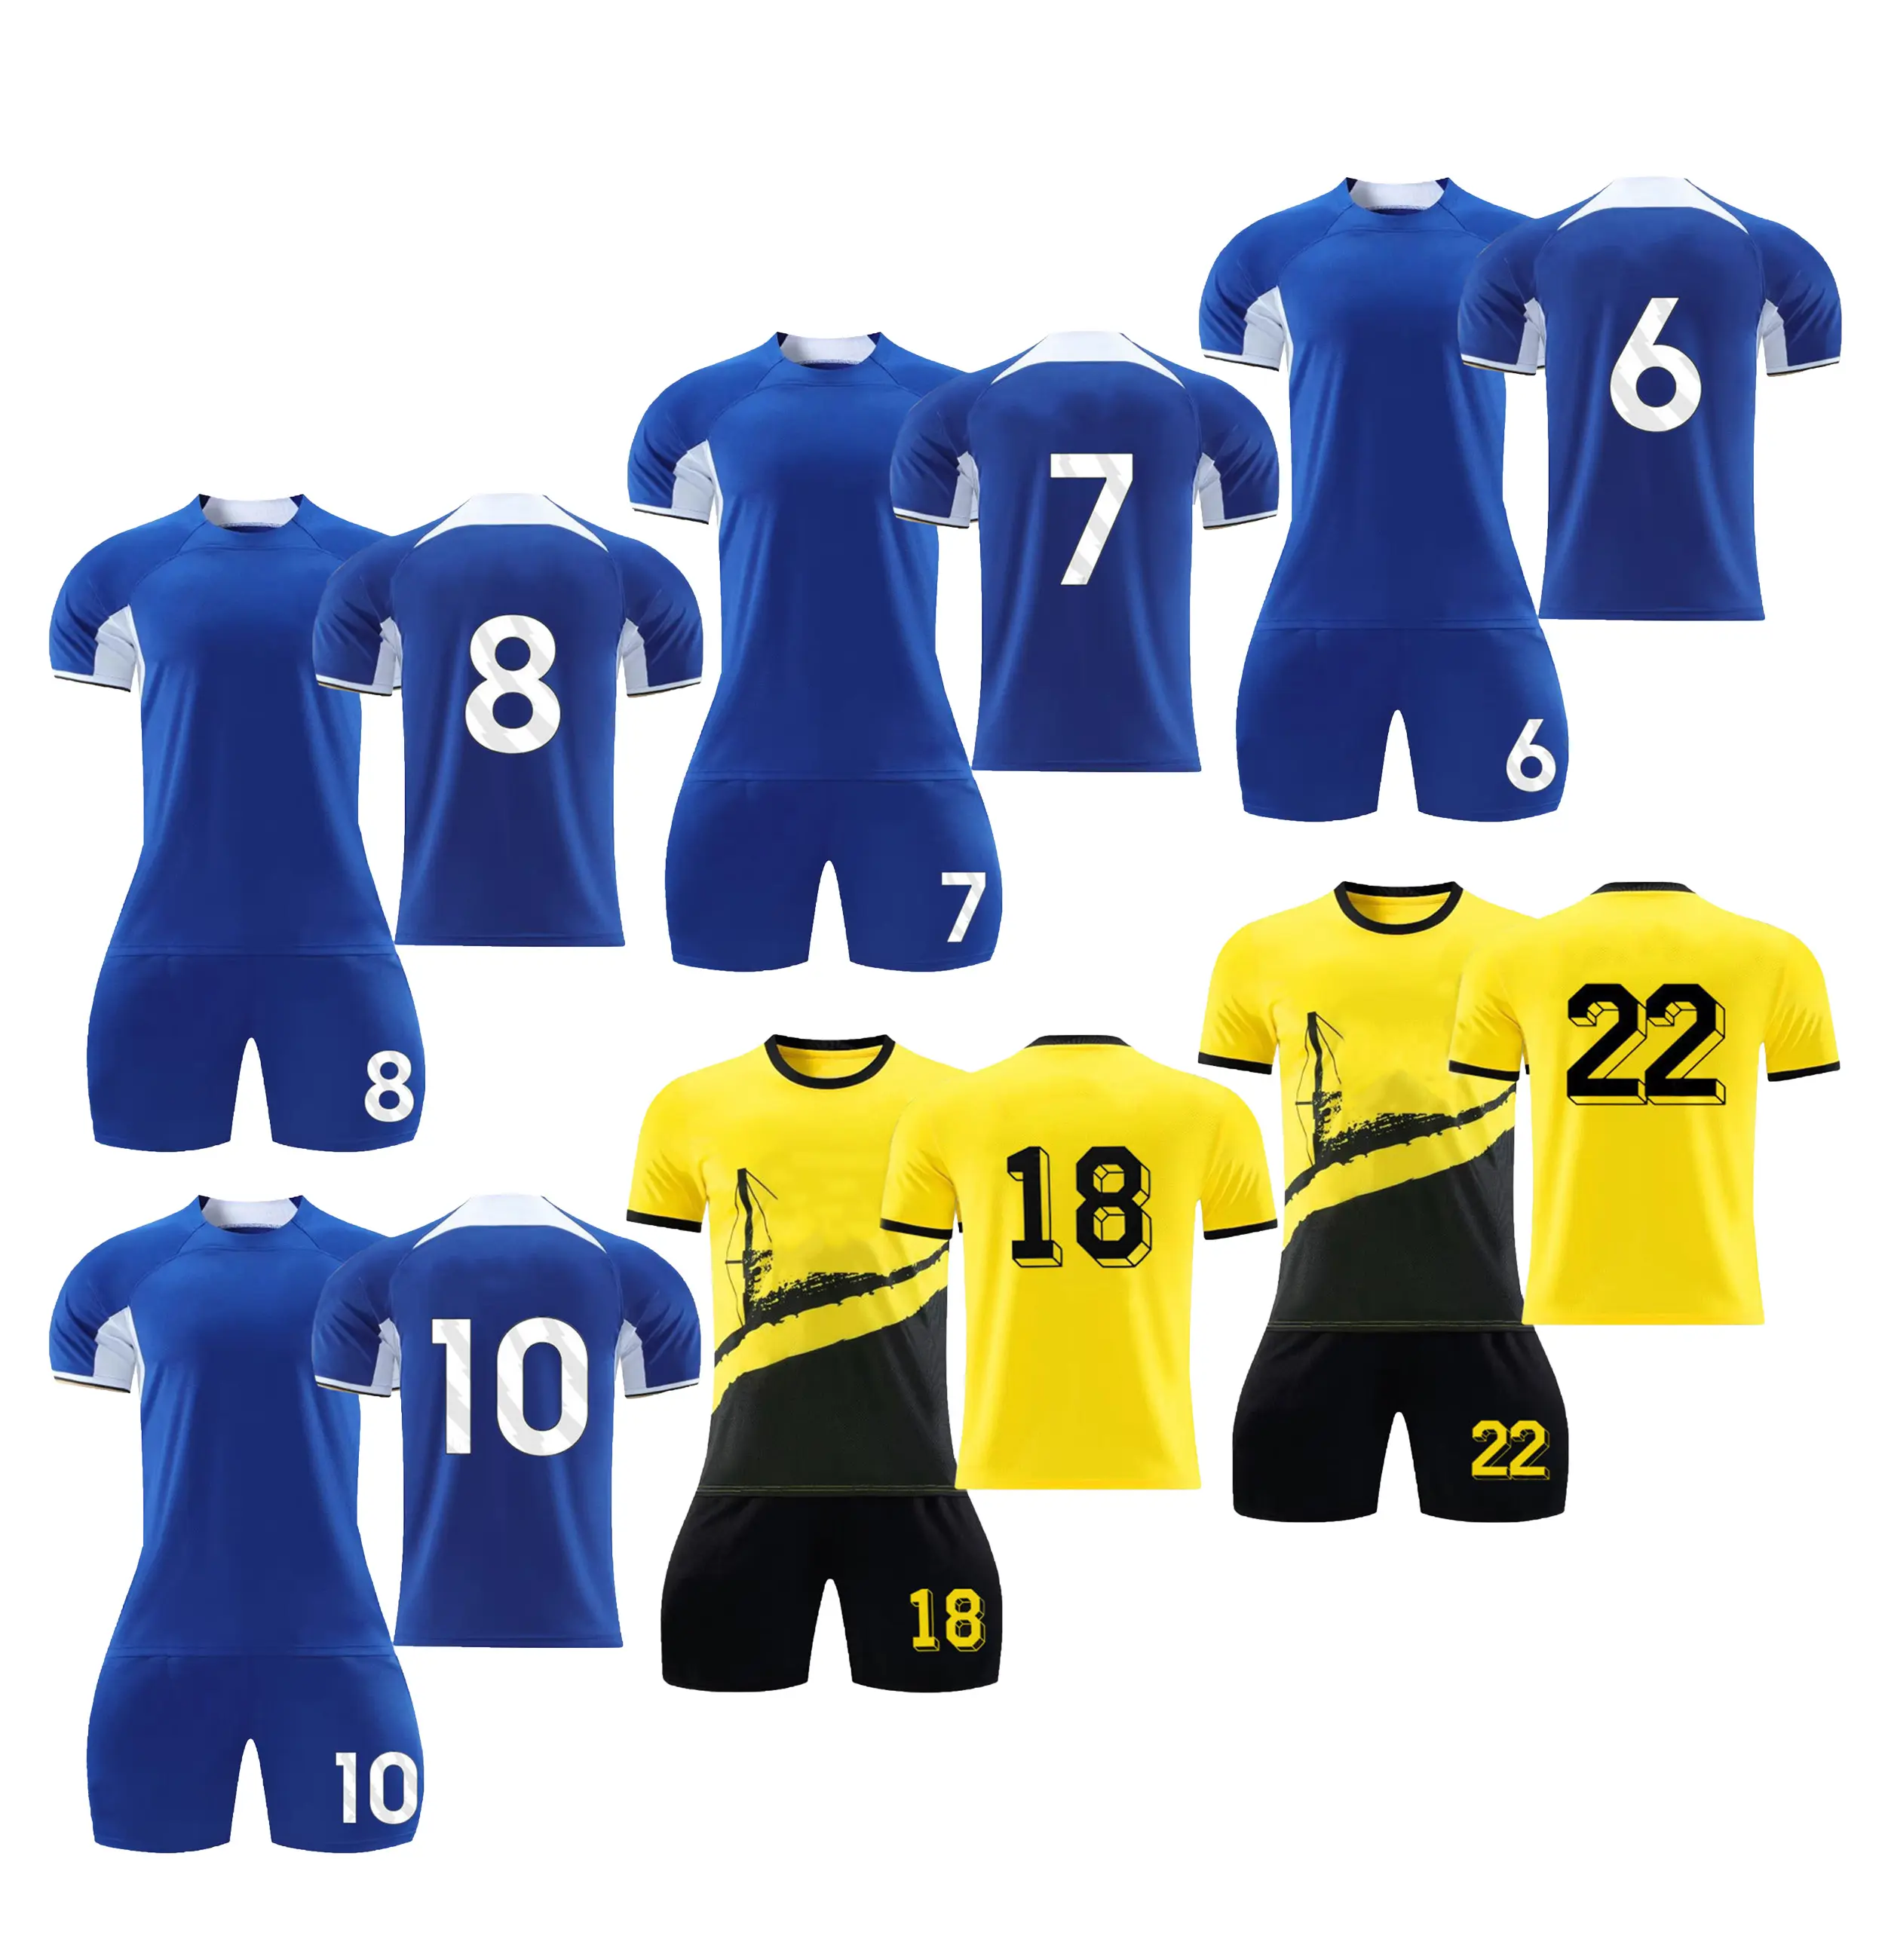 24-25 direct sales to adult and children's football suit manufacturer's store bulk batch of football tops